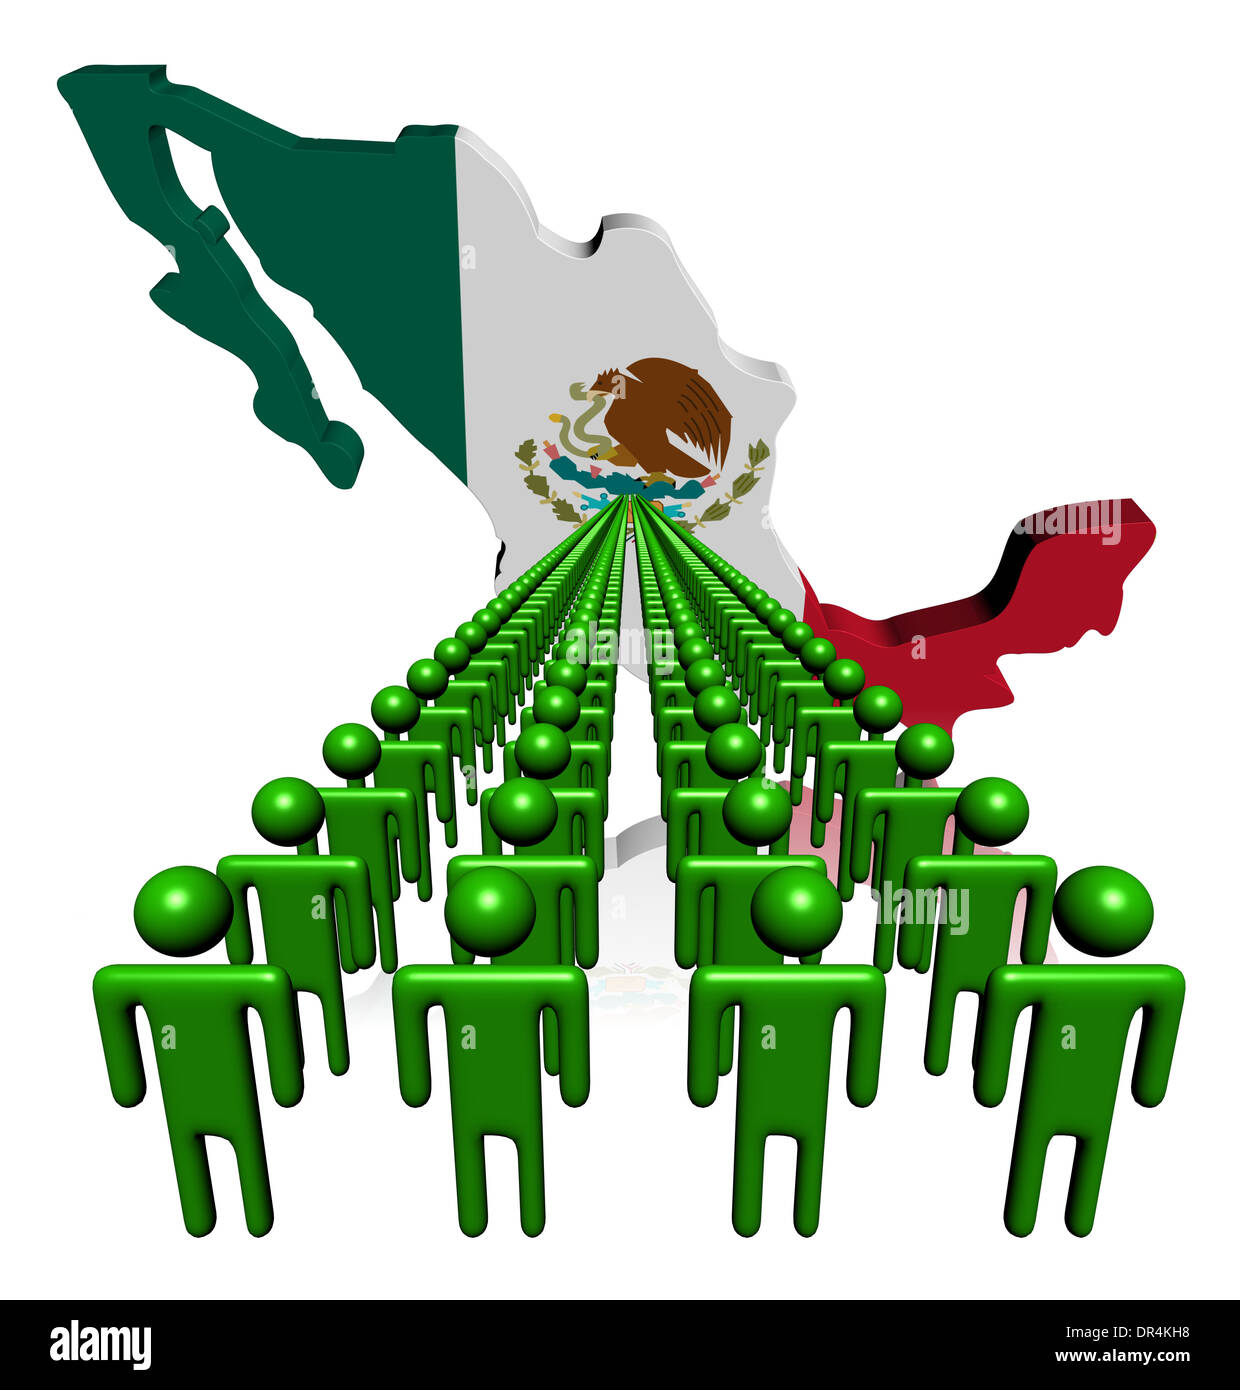 Lines of people with Mexico map flag illustration Stock Photo